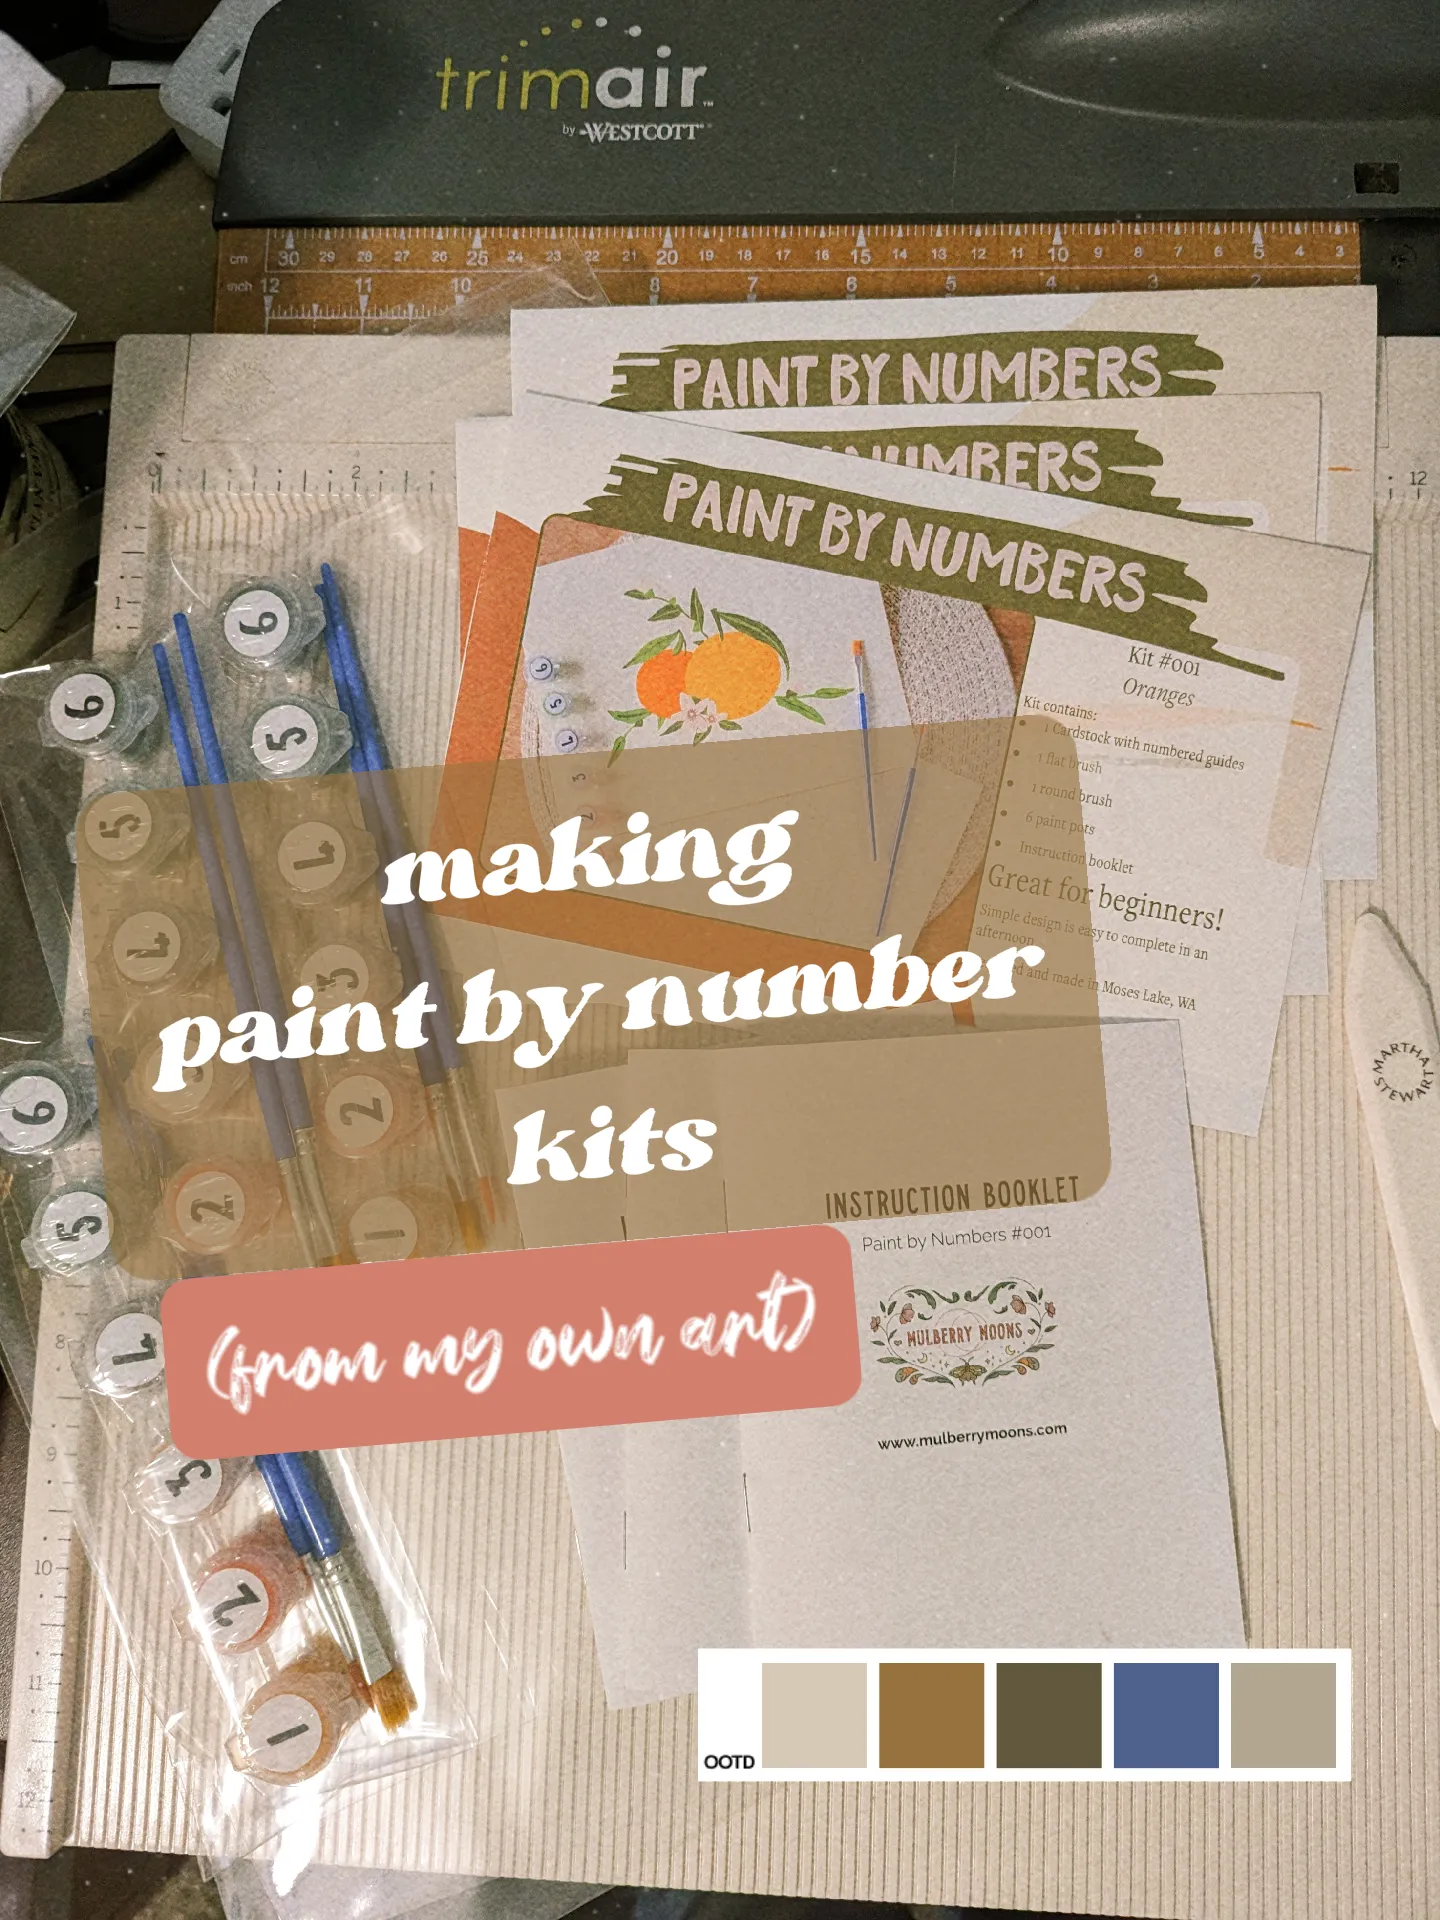 making paint by number kits (from my own art)'s images